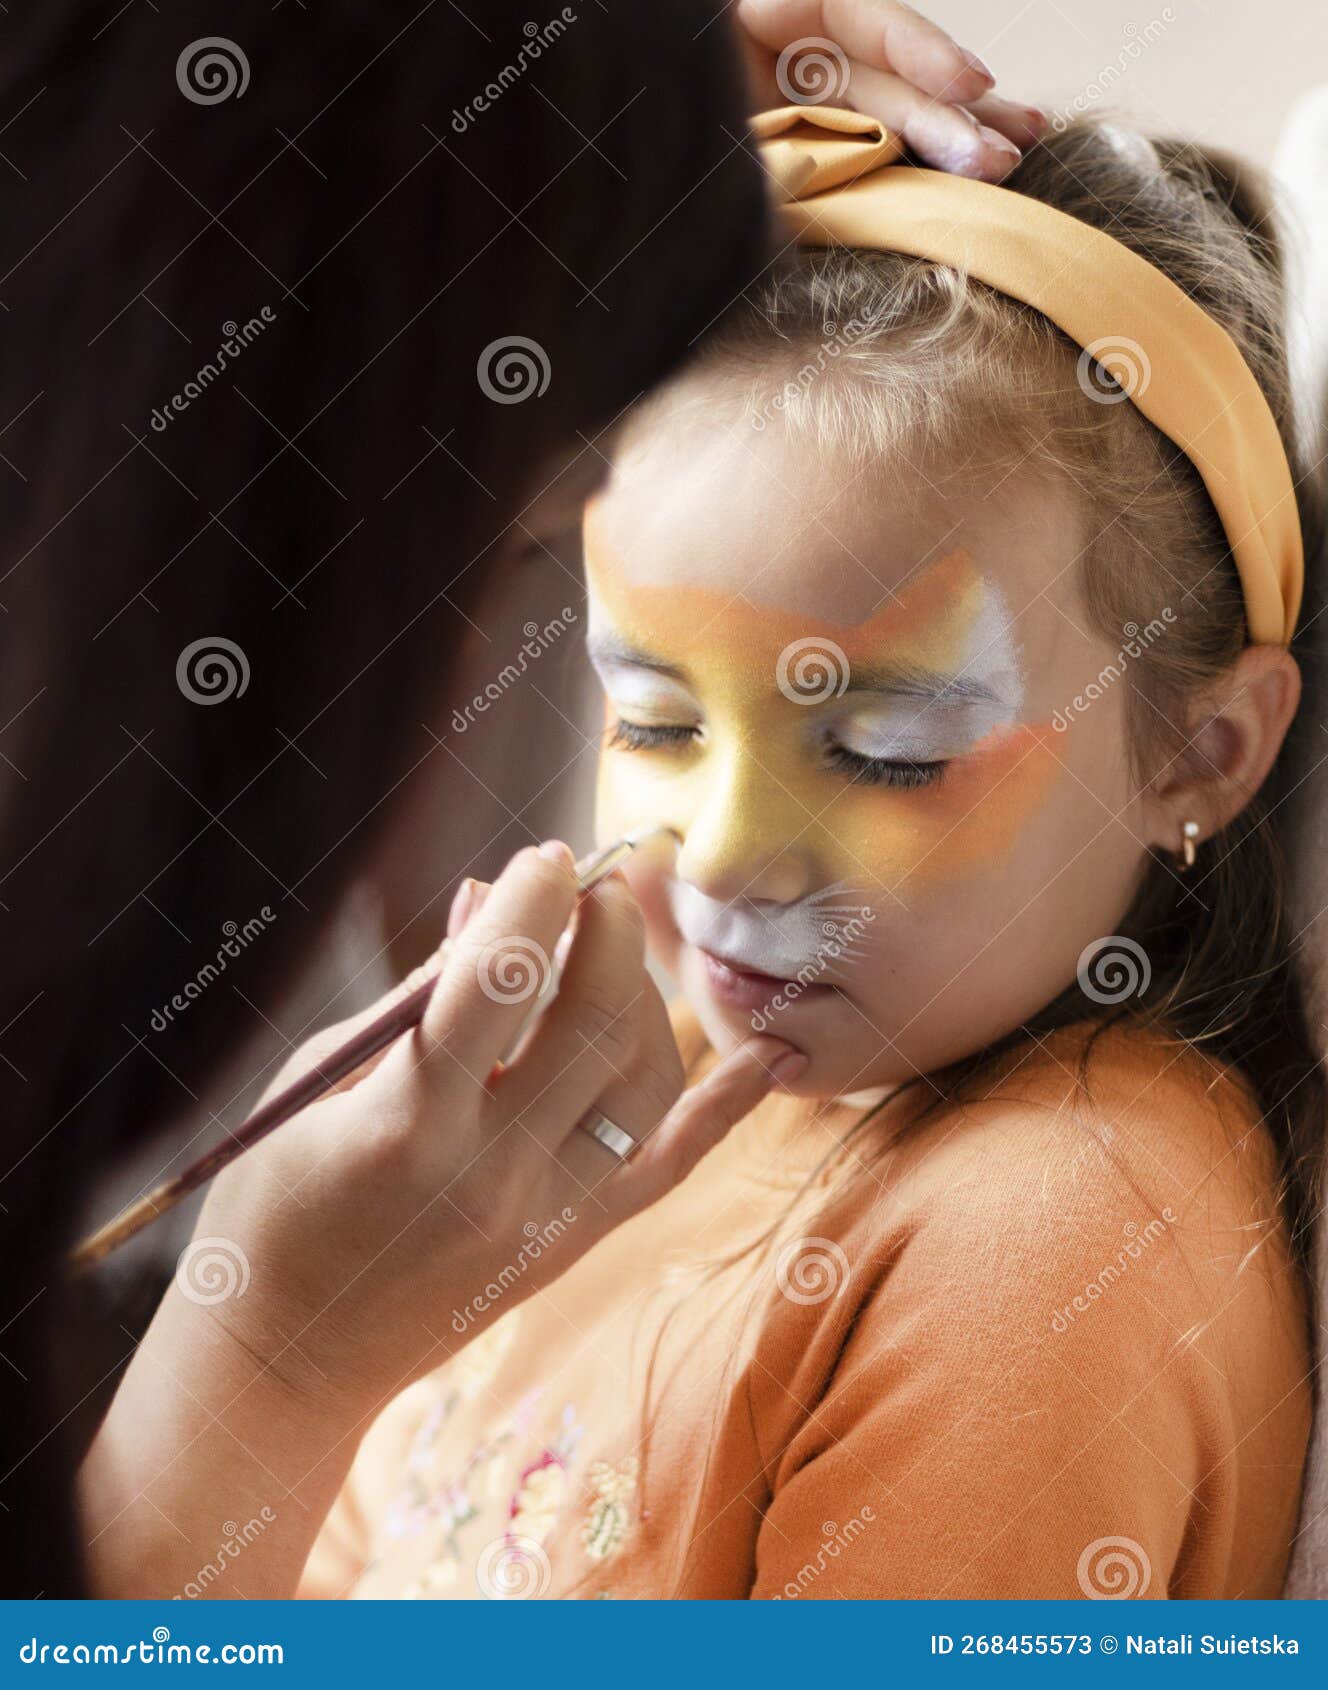 Cute Makeup Little Tiger. Girl Getting Face Painting Outdoors